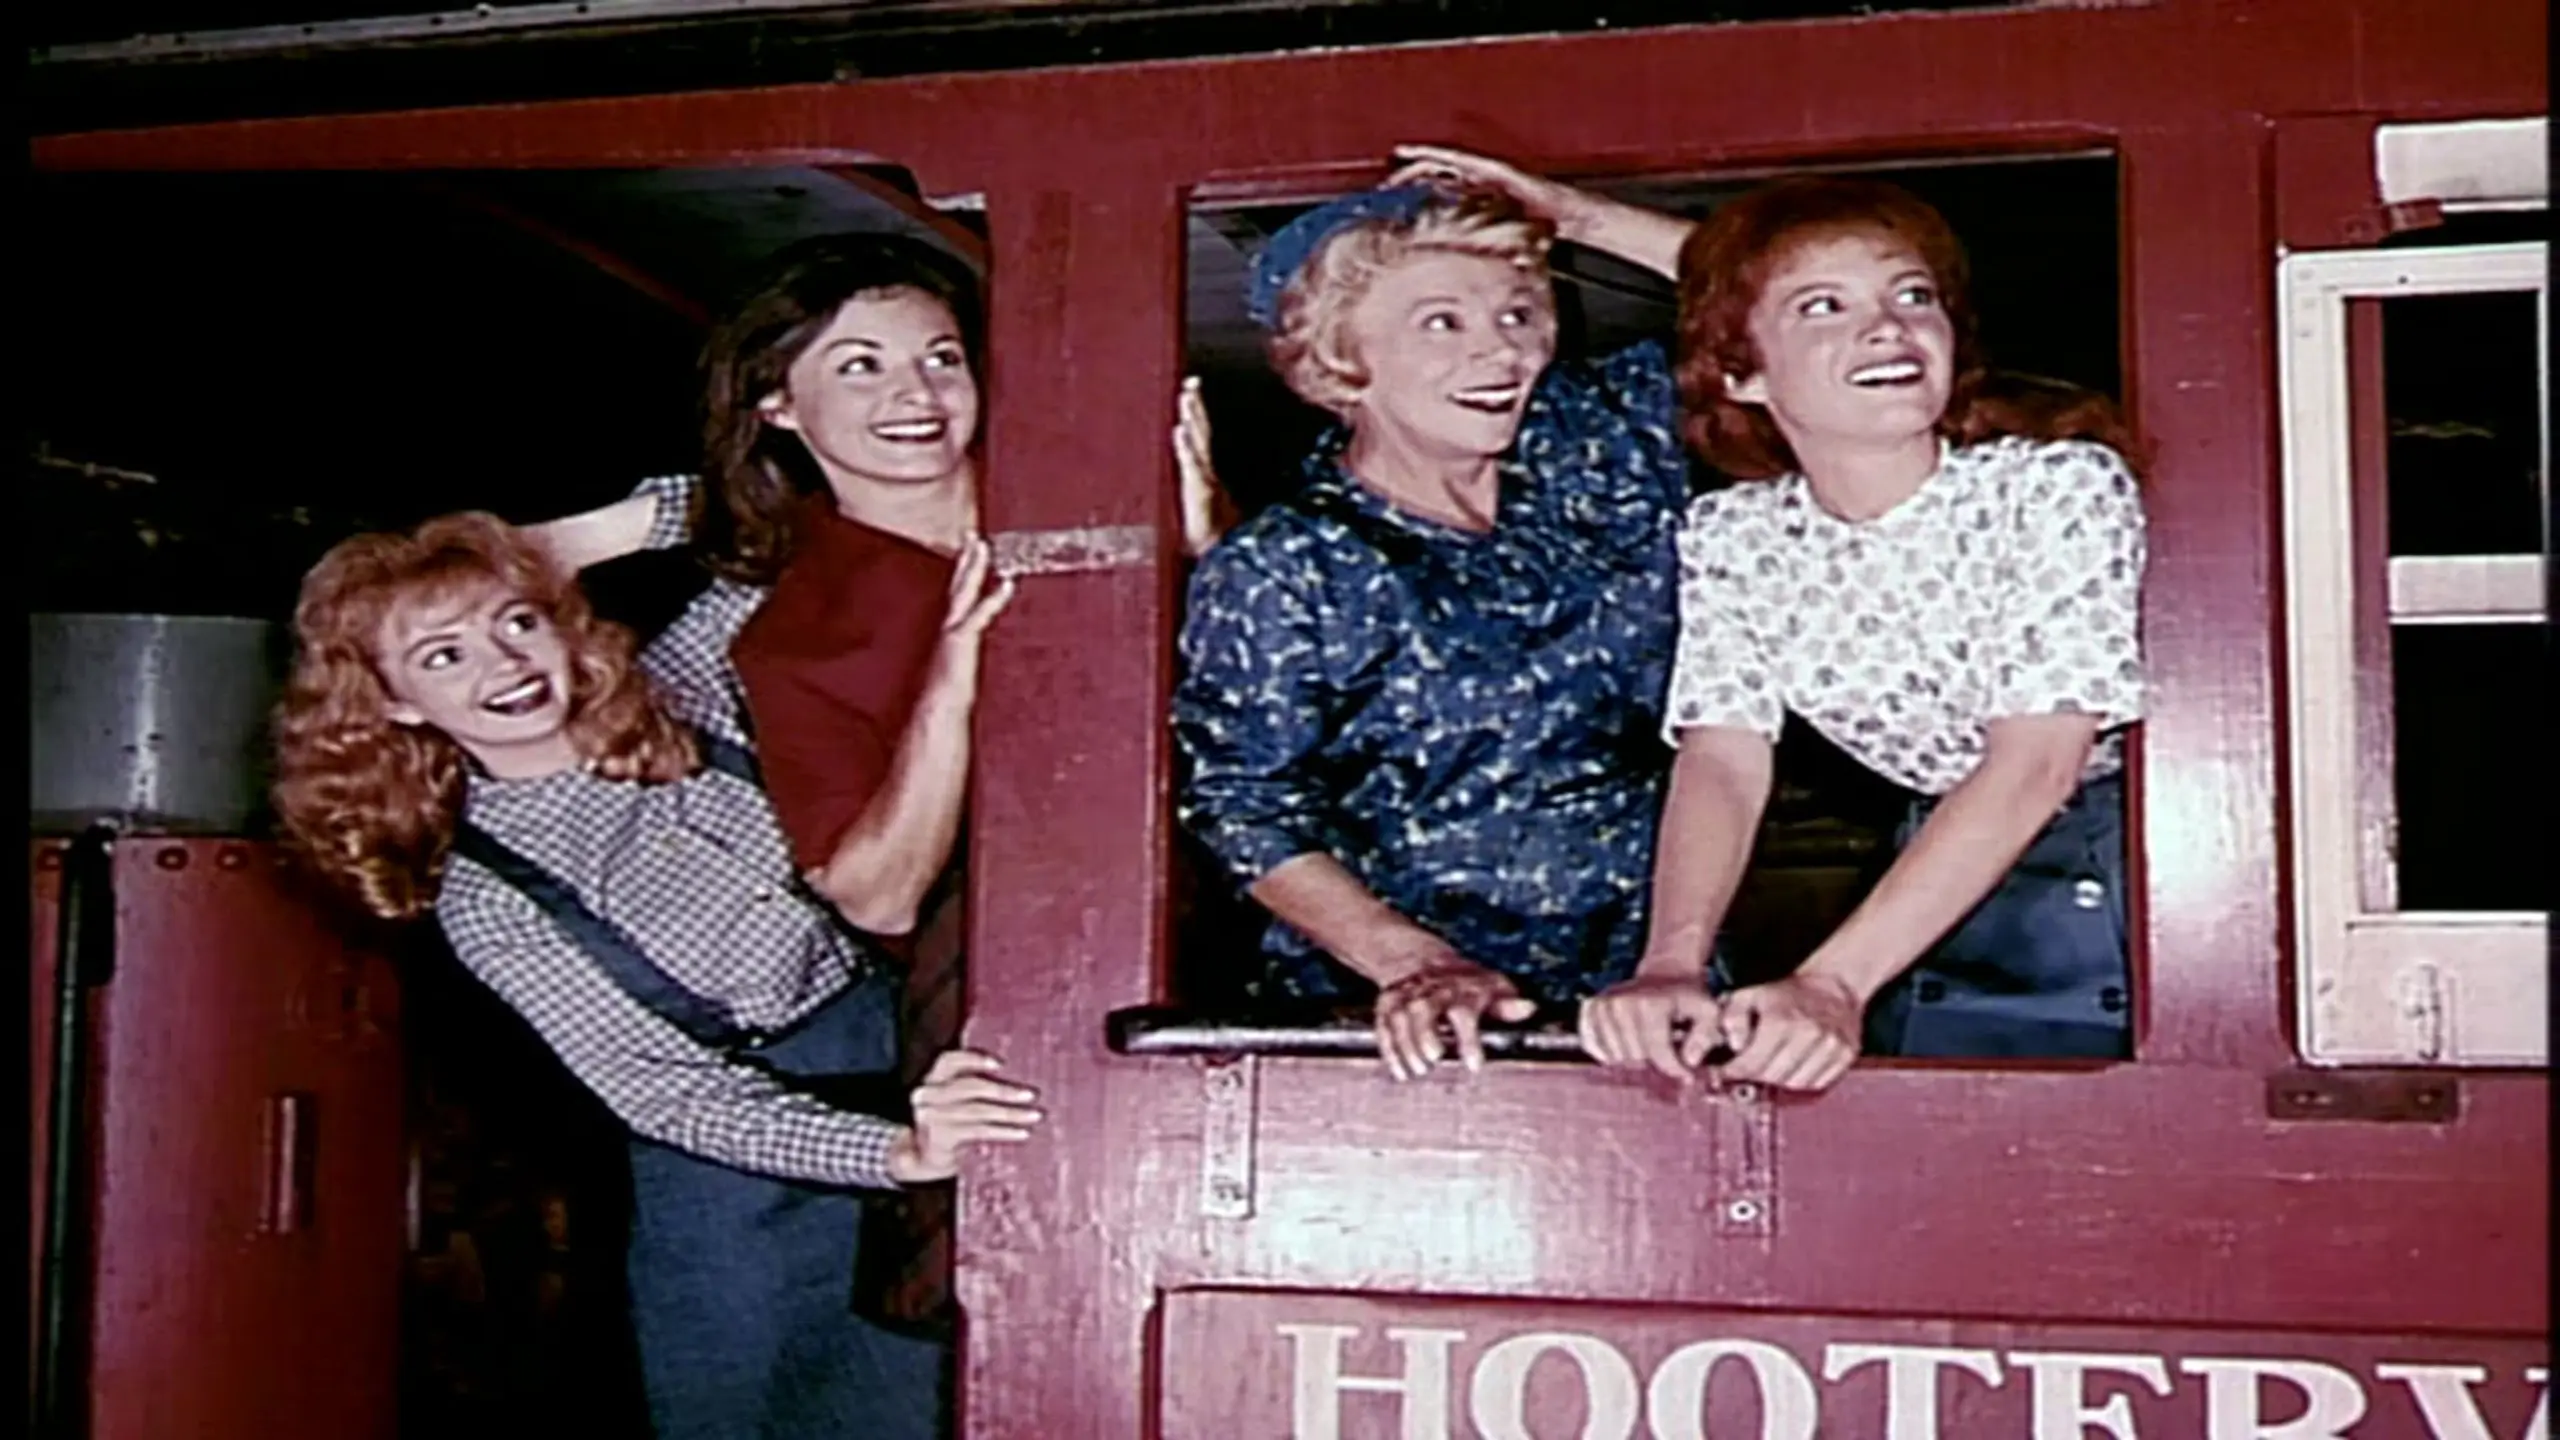 The History of Hooterville